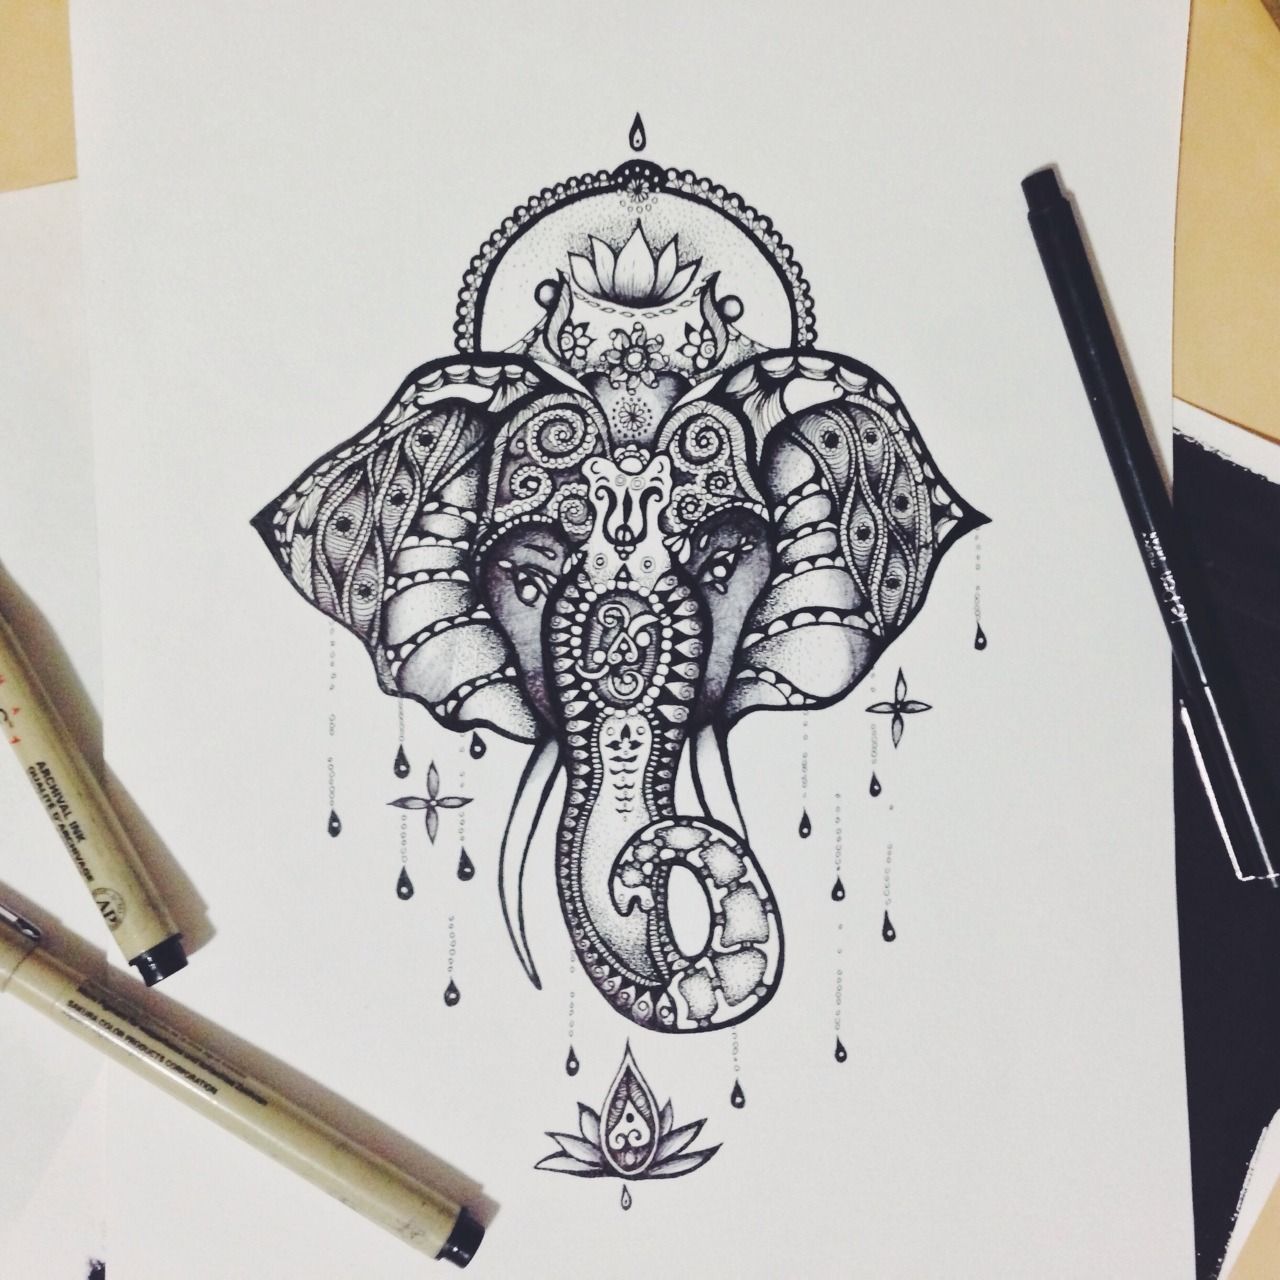 I love love the elephant and lotus flower combo. Just not sure how it would look as a sternum piece.